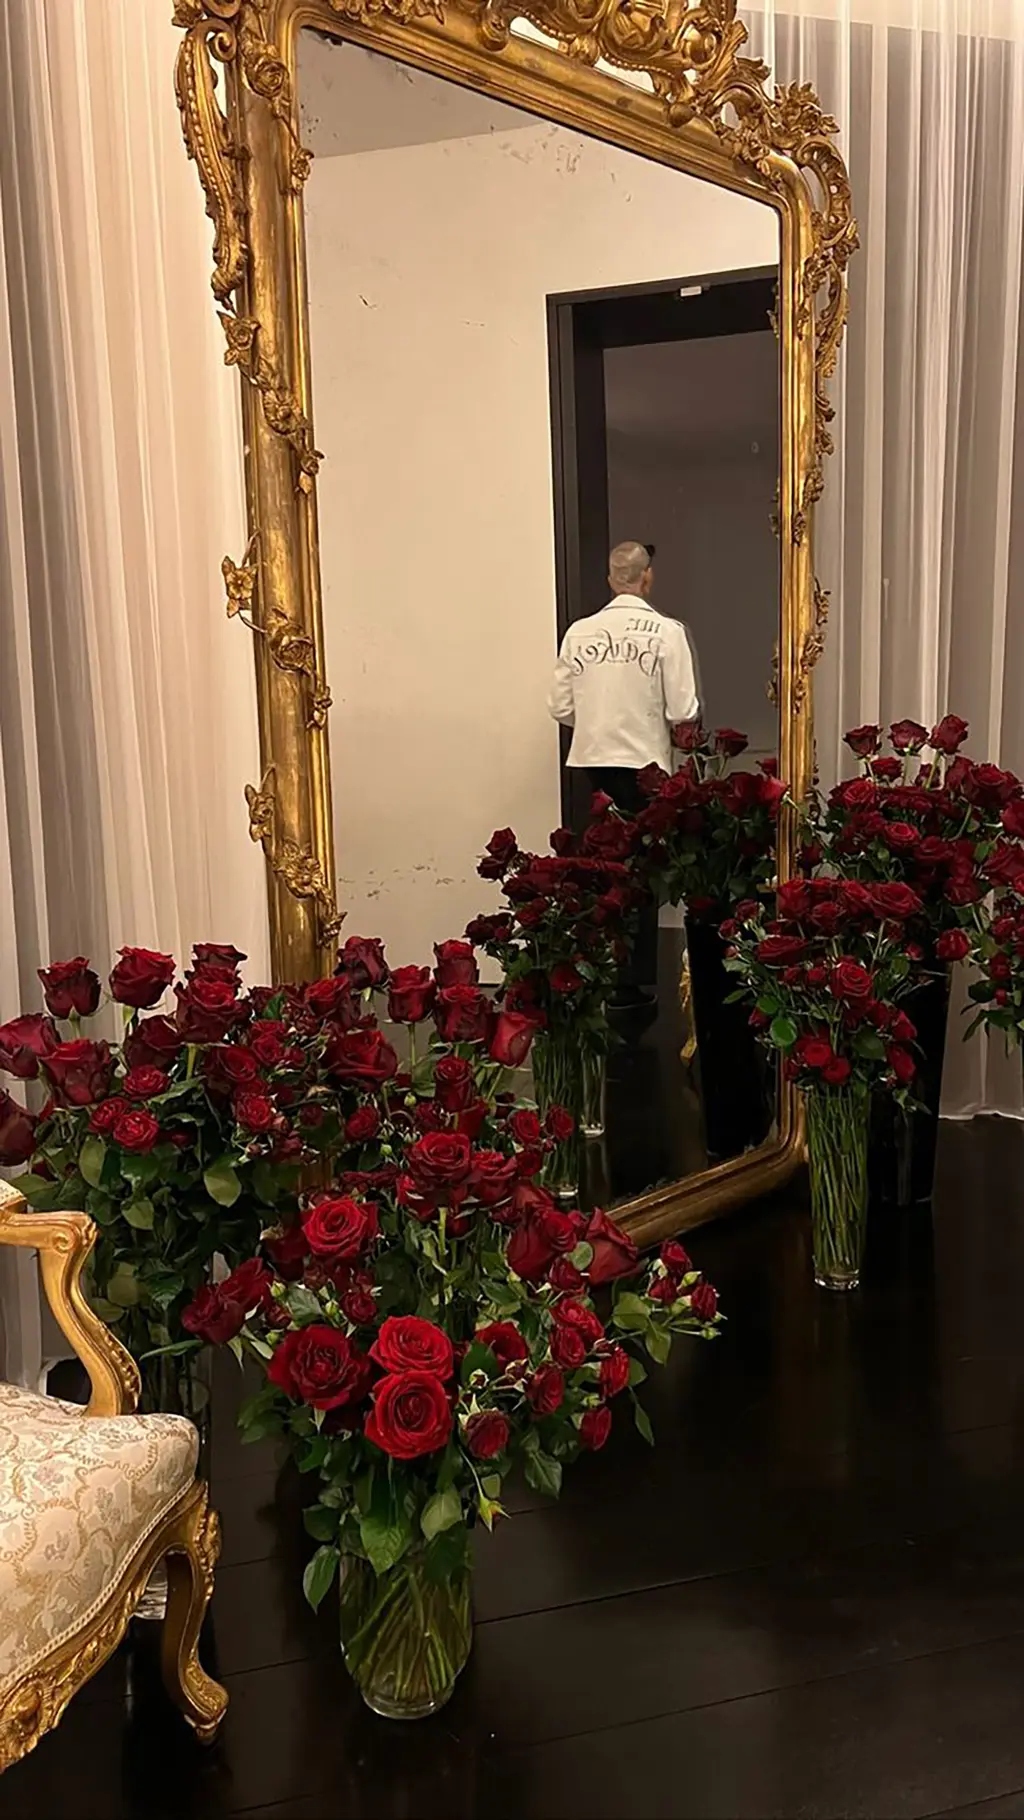 Dozens of other red roses lined a gold mirror in their room